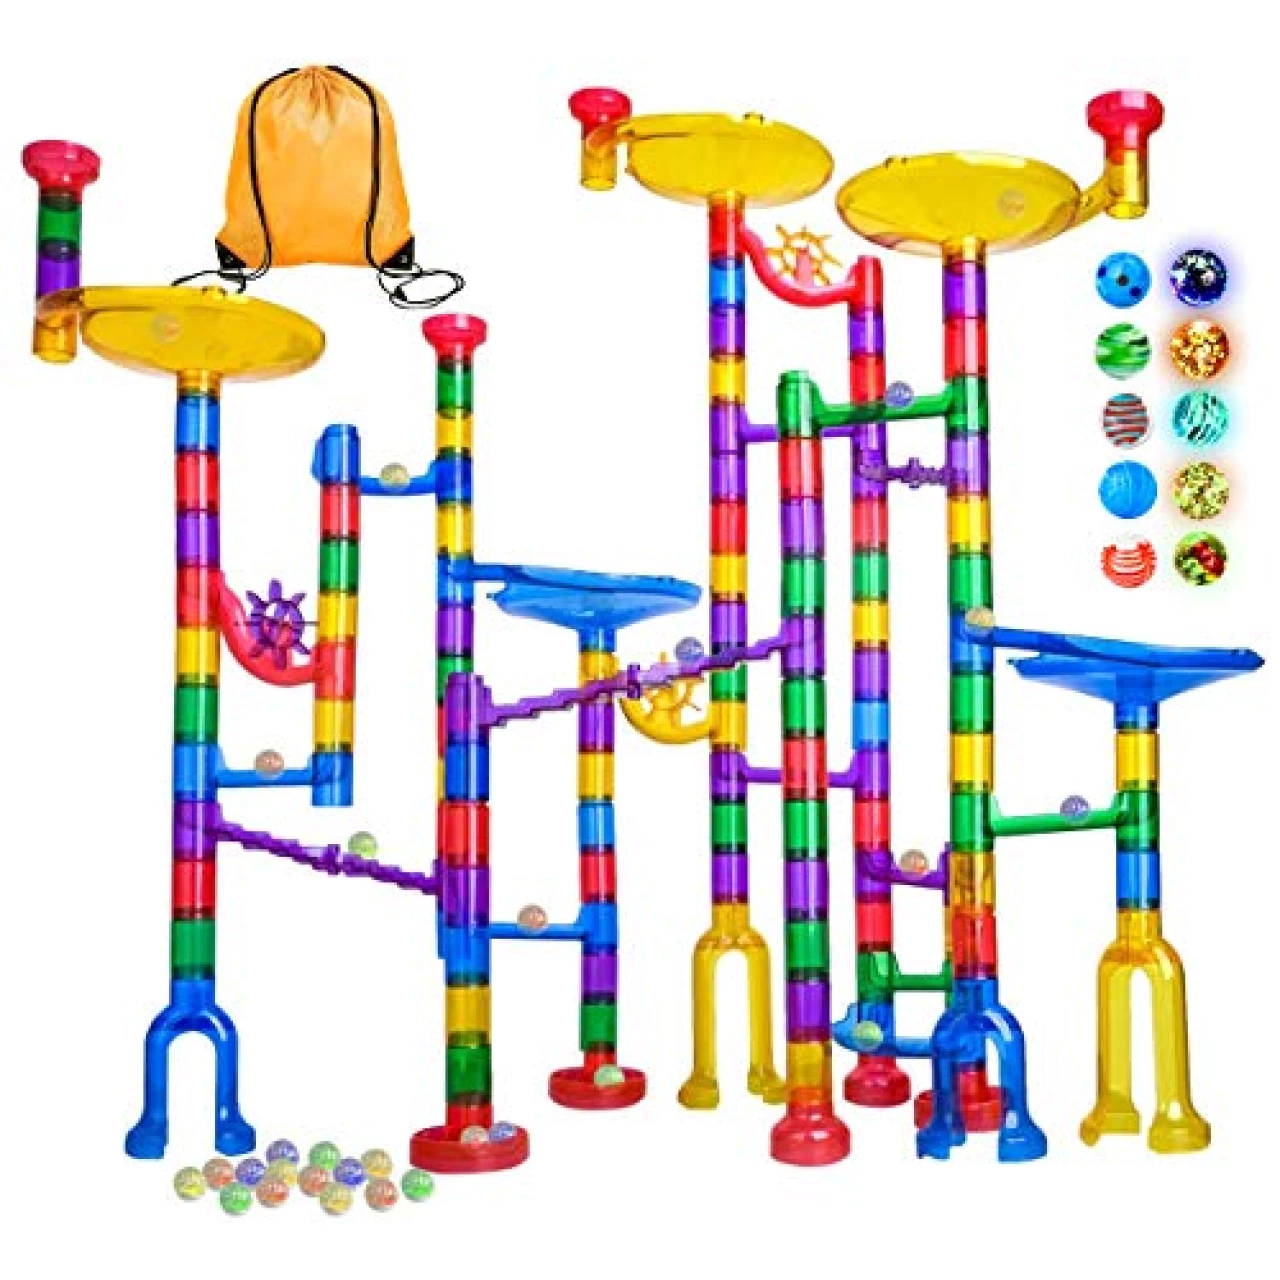 Meland Marble Run - 132Pcs Marble Maze Game Building Toy for Kid, Marble Track Race Set&amp;STEM Learning Toy Gift&hellip;